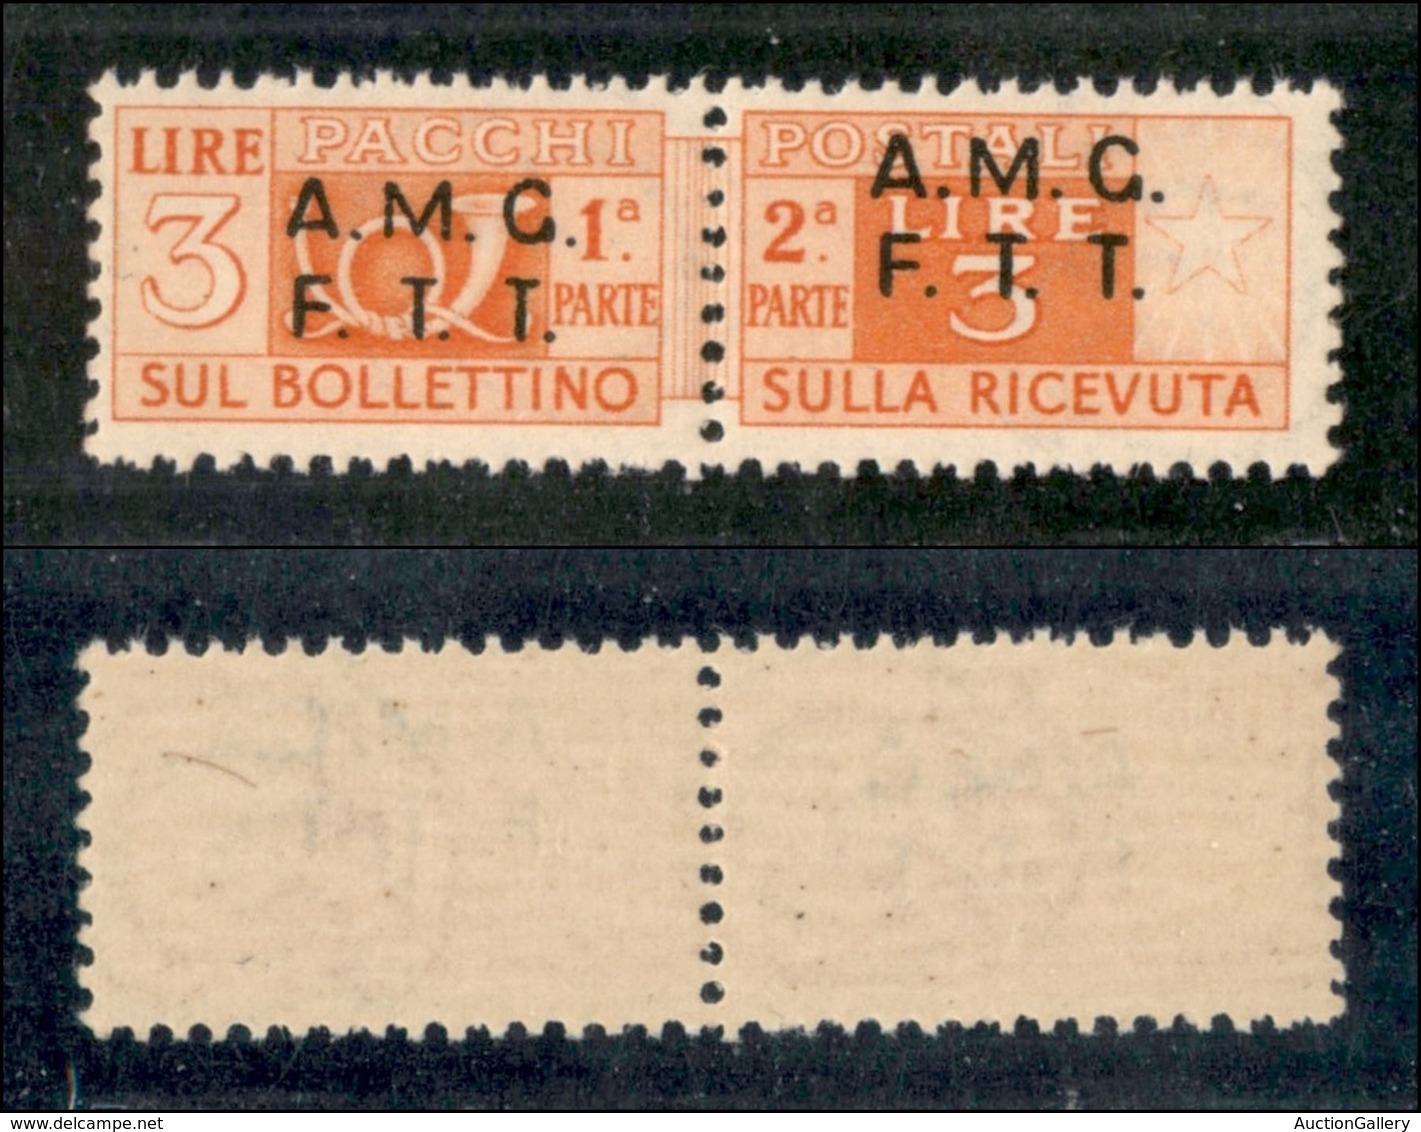 Trieste  - Trieste AMG FTT - 1947 - Pacchi Postali - 3 Lire (3if) Con Soprastampe Disallineate - Gomma Integra (160) - Other & Unclassified